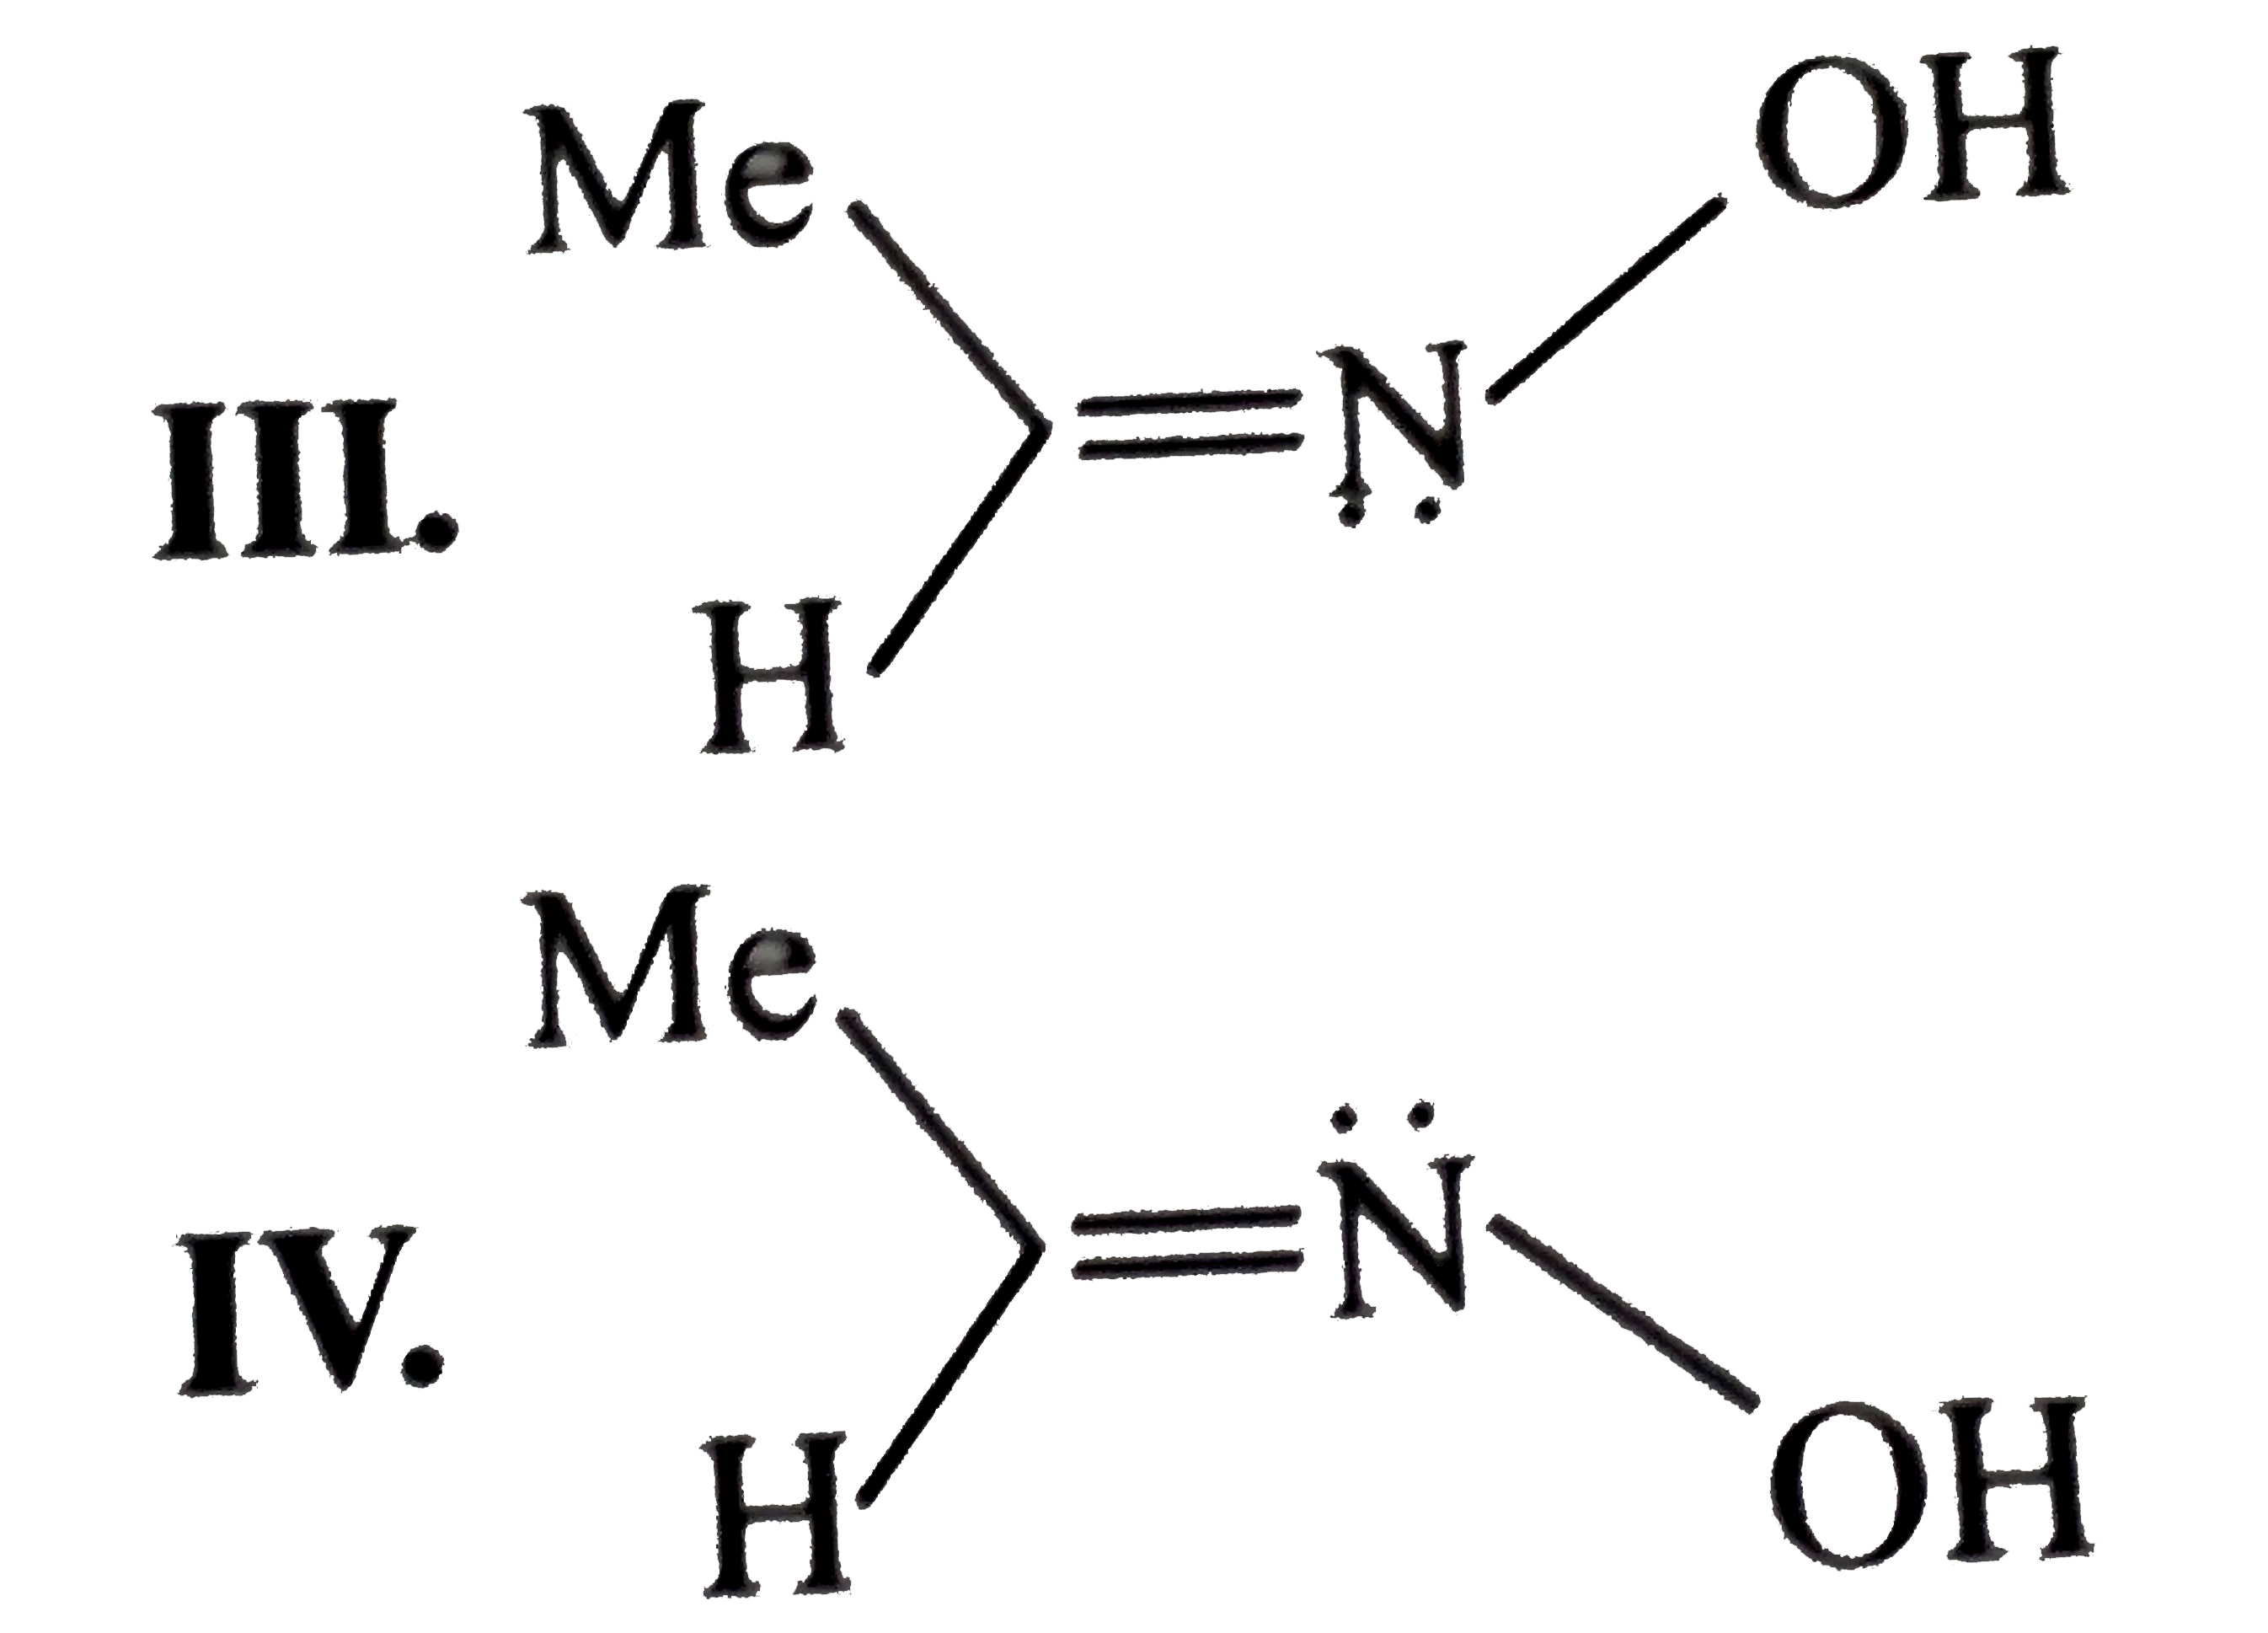 Aldehyde (A) overset(NH(2)OH.HCl)rarr (B) overset(H^(o+))rarr Me NH(2)+HCOOH   Aldehyde (A) and compound (B), respectively are:   Aldehyde (A)   I. MeCHO  
II. HCHO   Compound (B)   
III.